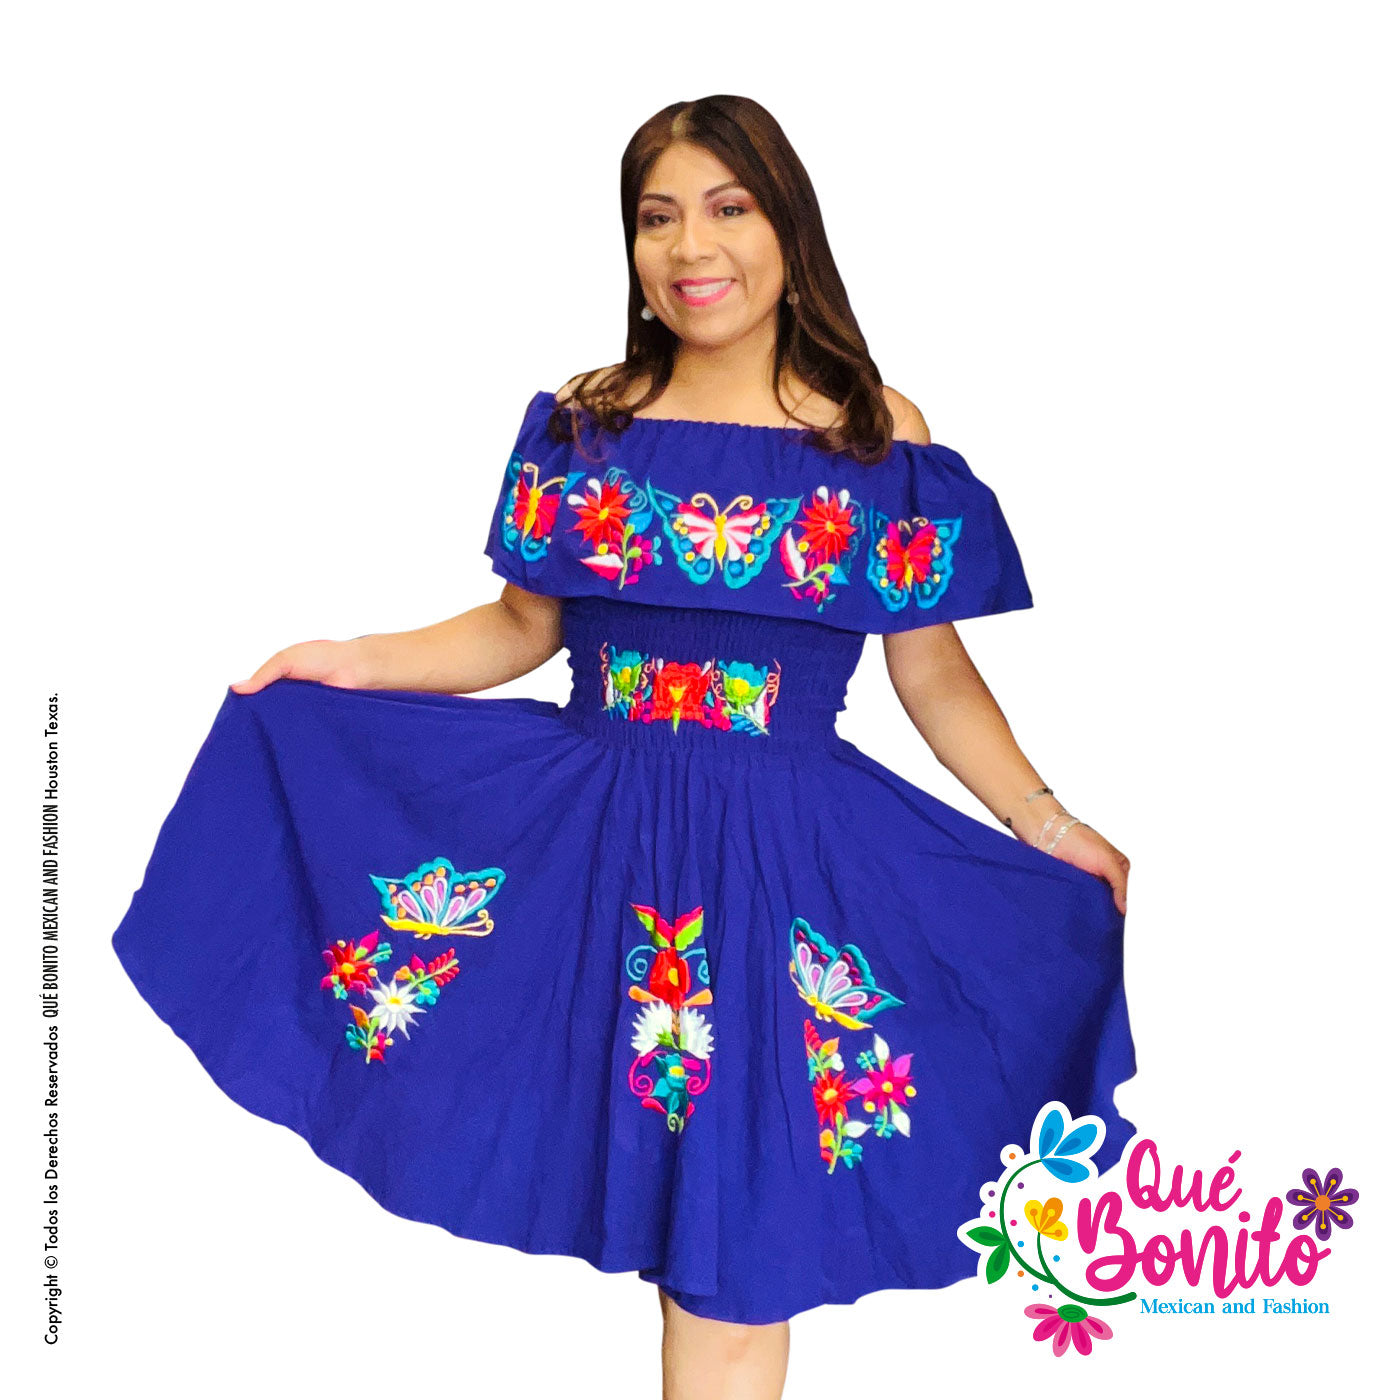 Butterfly Purple Blue Dress Que Bonito Mexican and Fashion